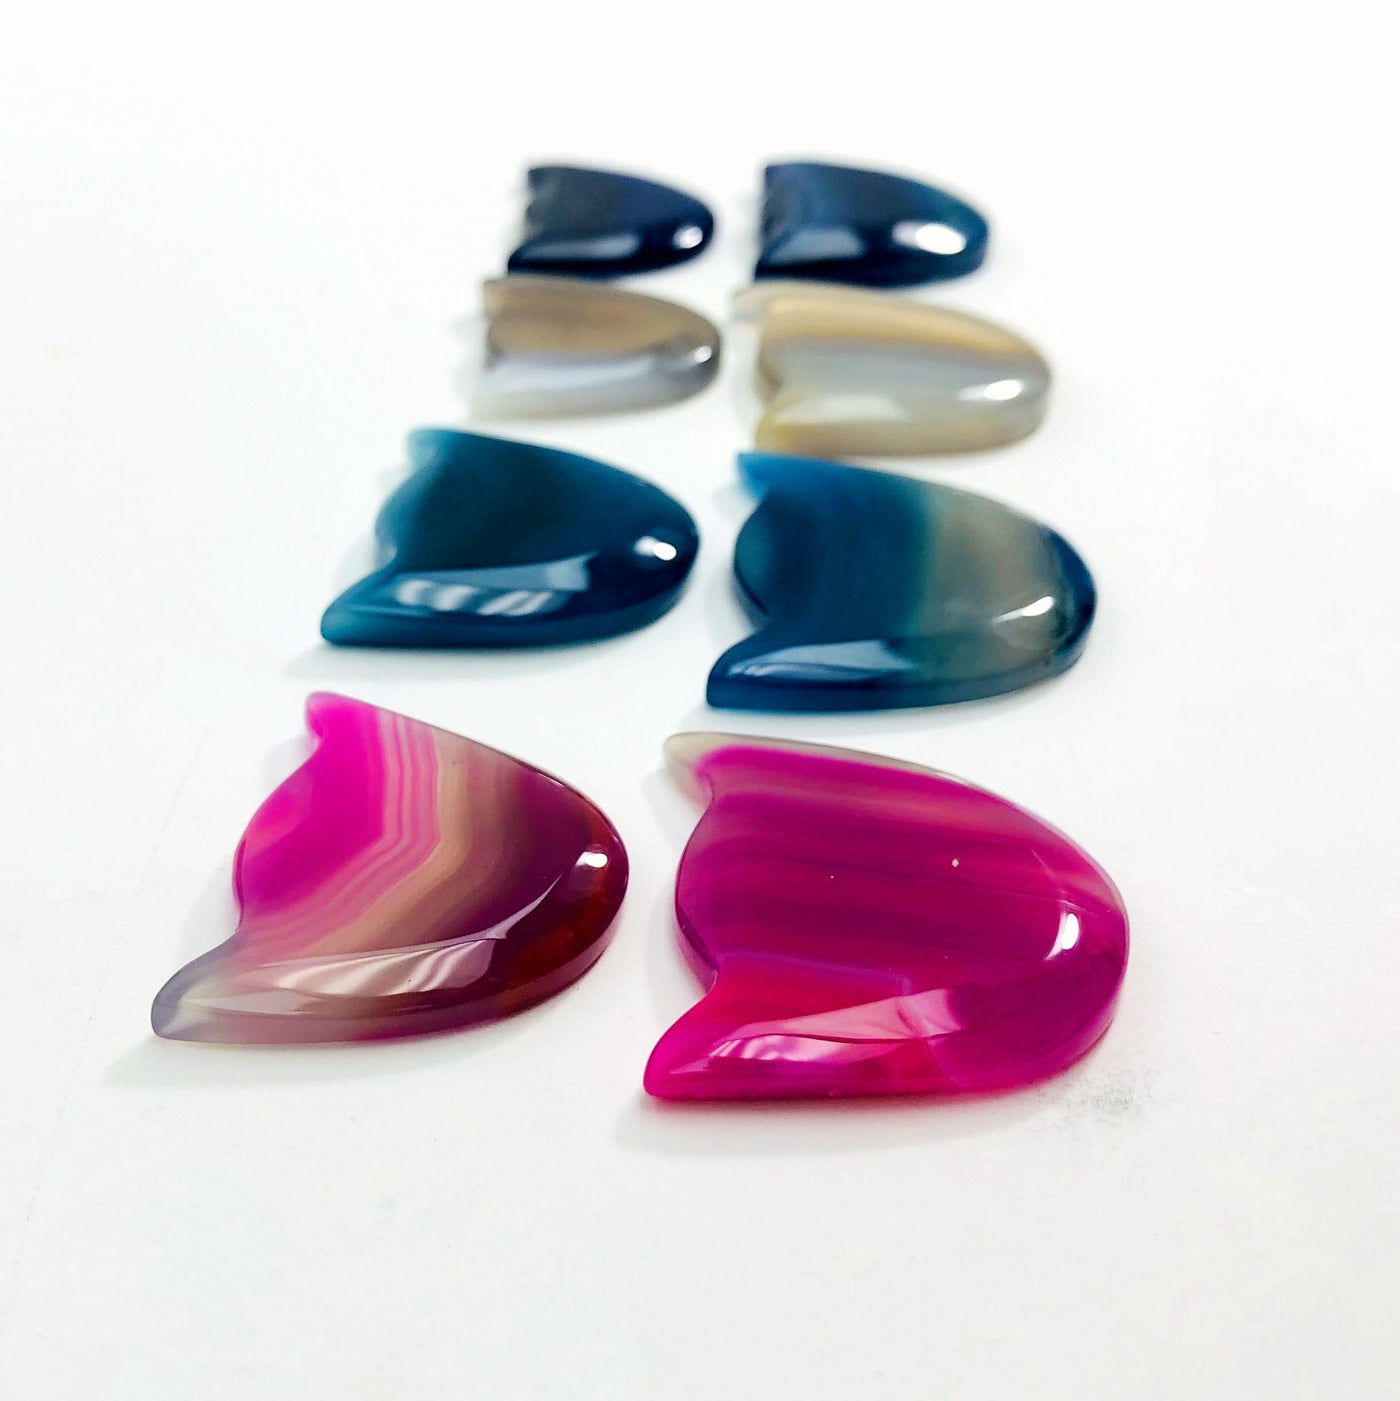 Agate Cats shown at an angle to show thickness approximation.